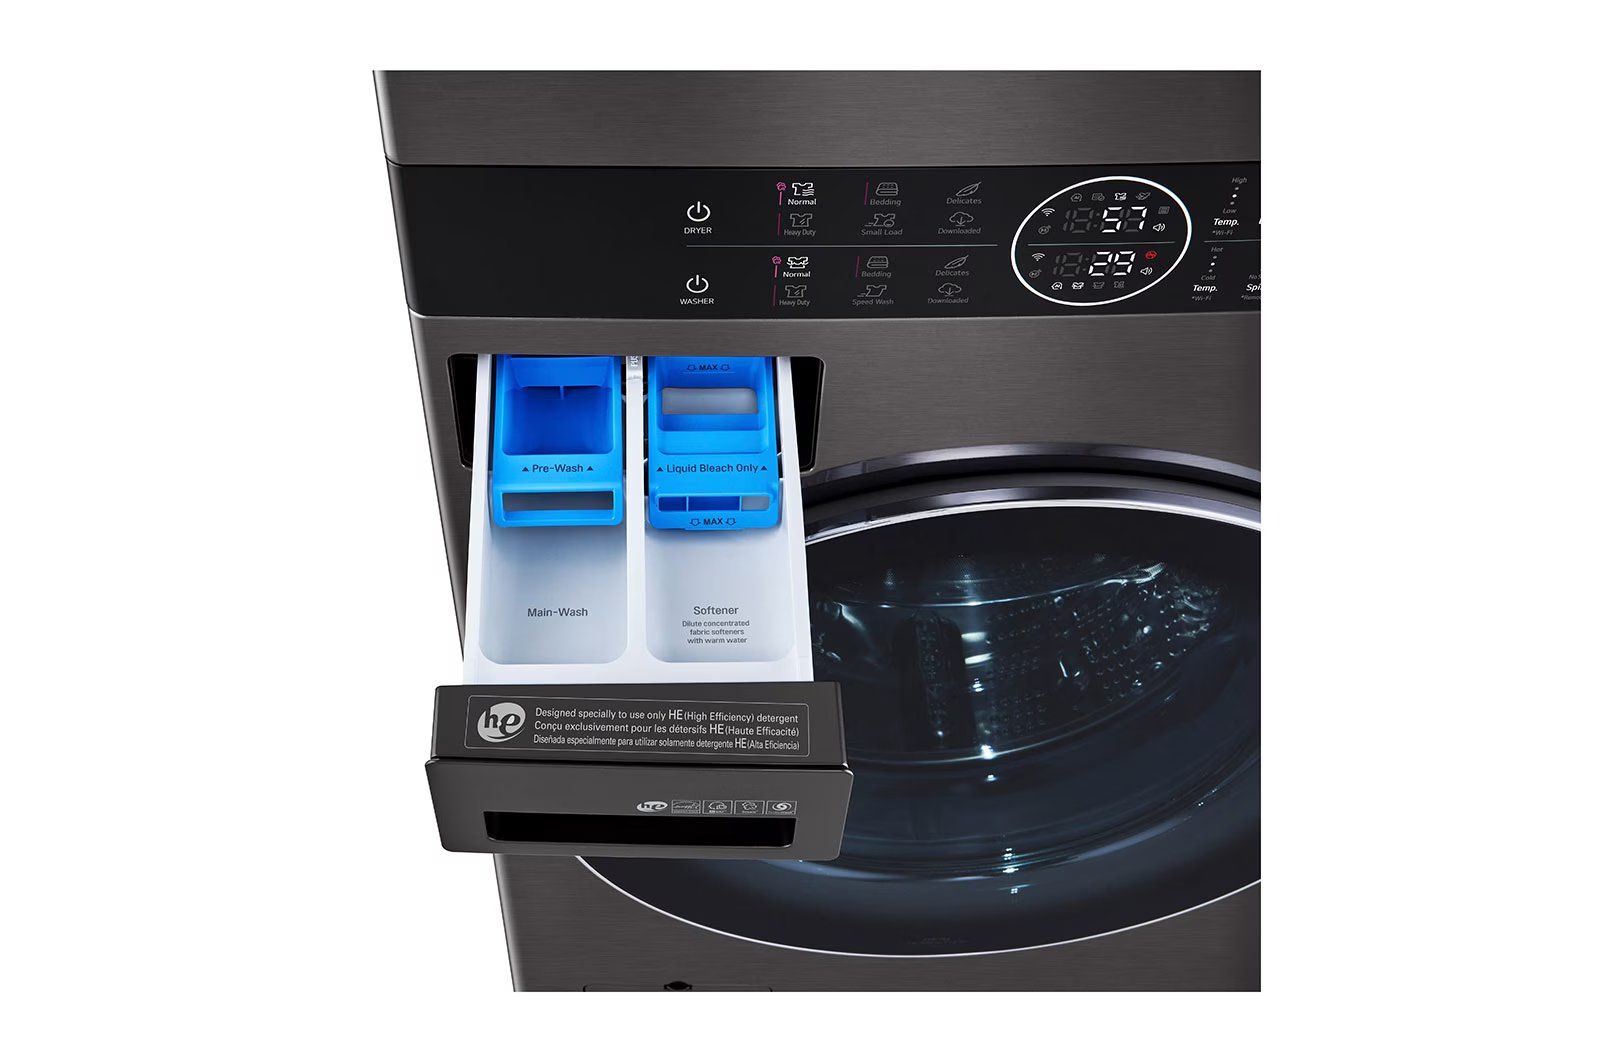 LG - 5.2 cu. Ft Washer and 7.4 Dryer Wash Tower in Black Stainless - WKGX201HBA